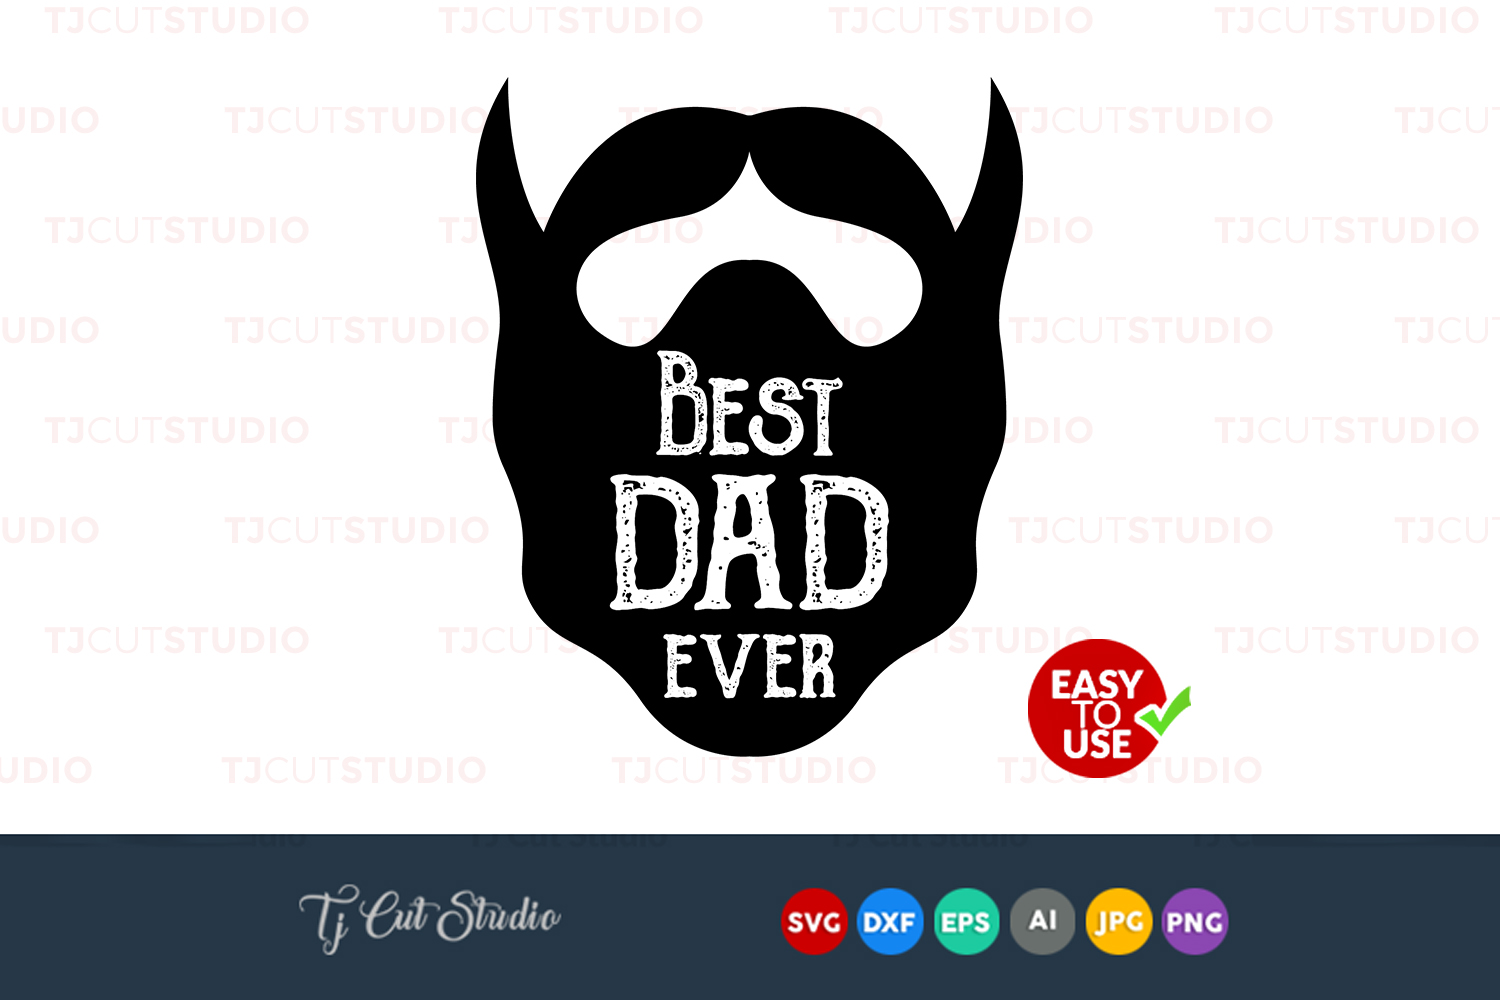 Download Fathers day svg, Best dad ever svg, quote svg, Files for ...